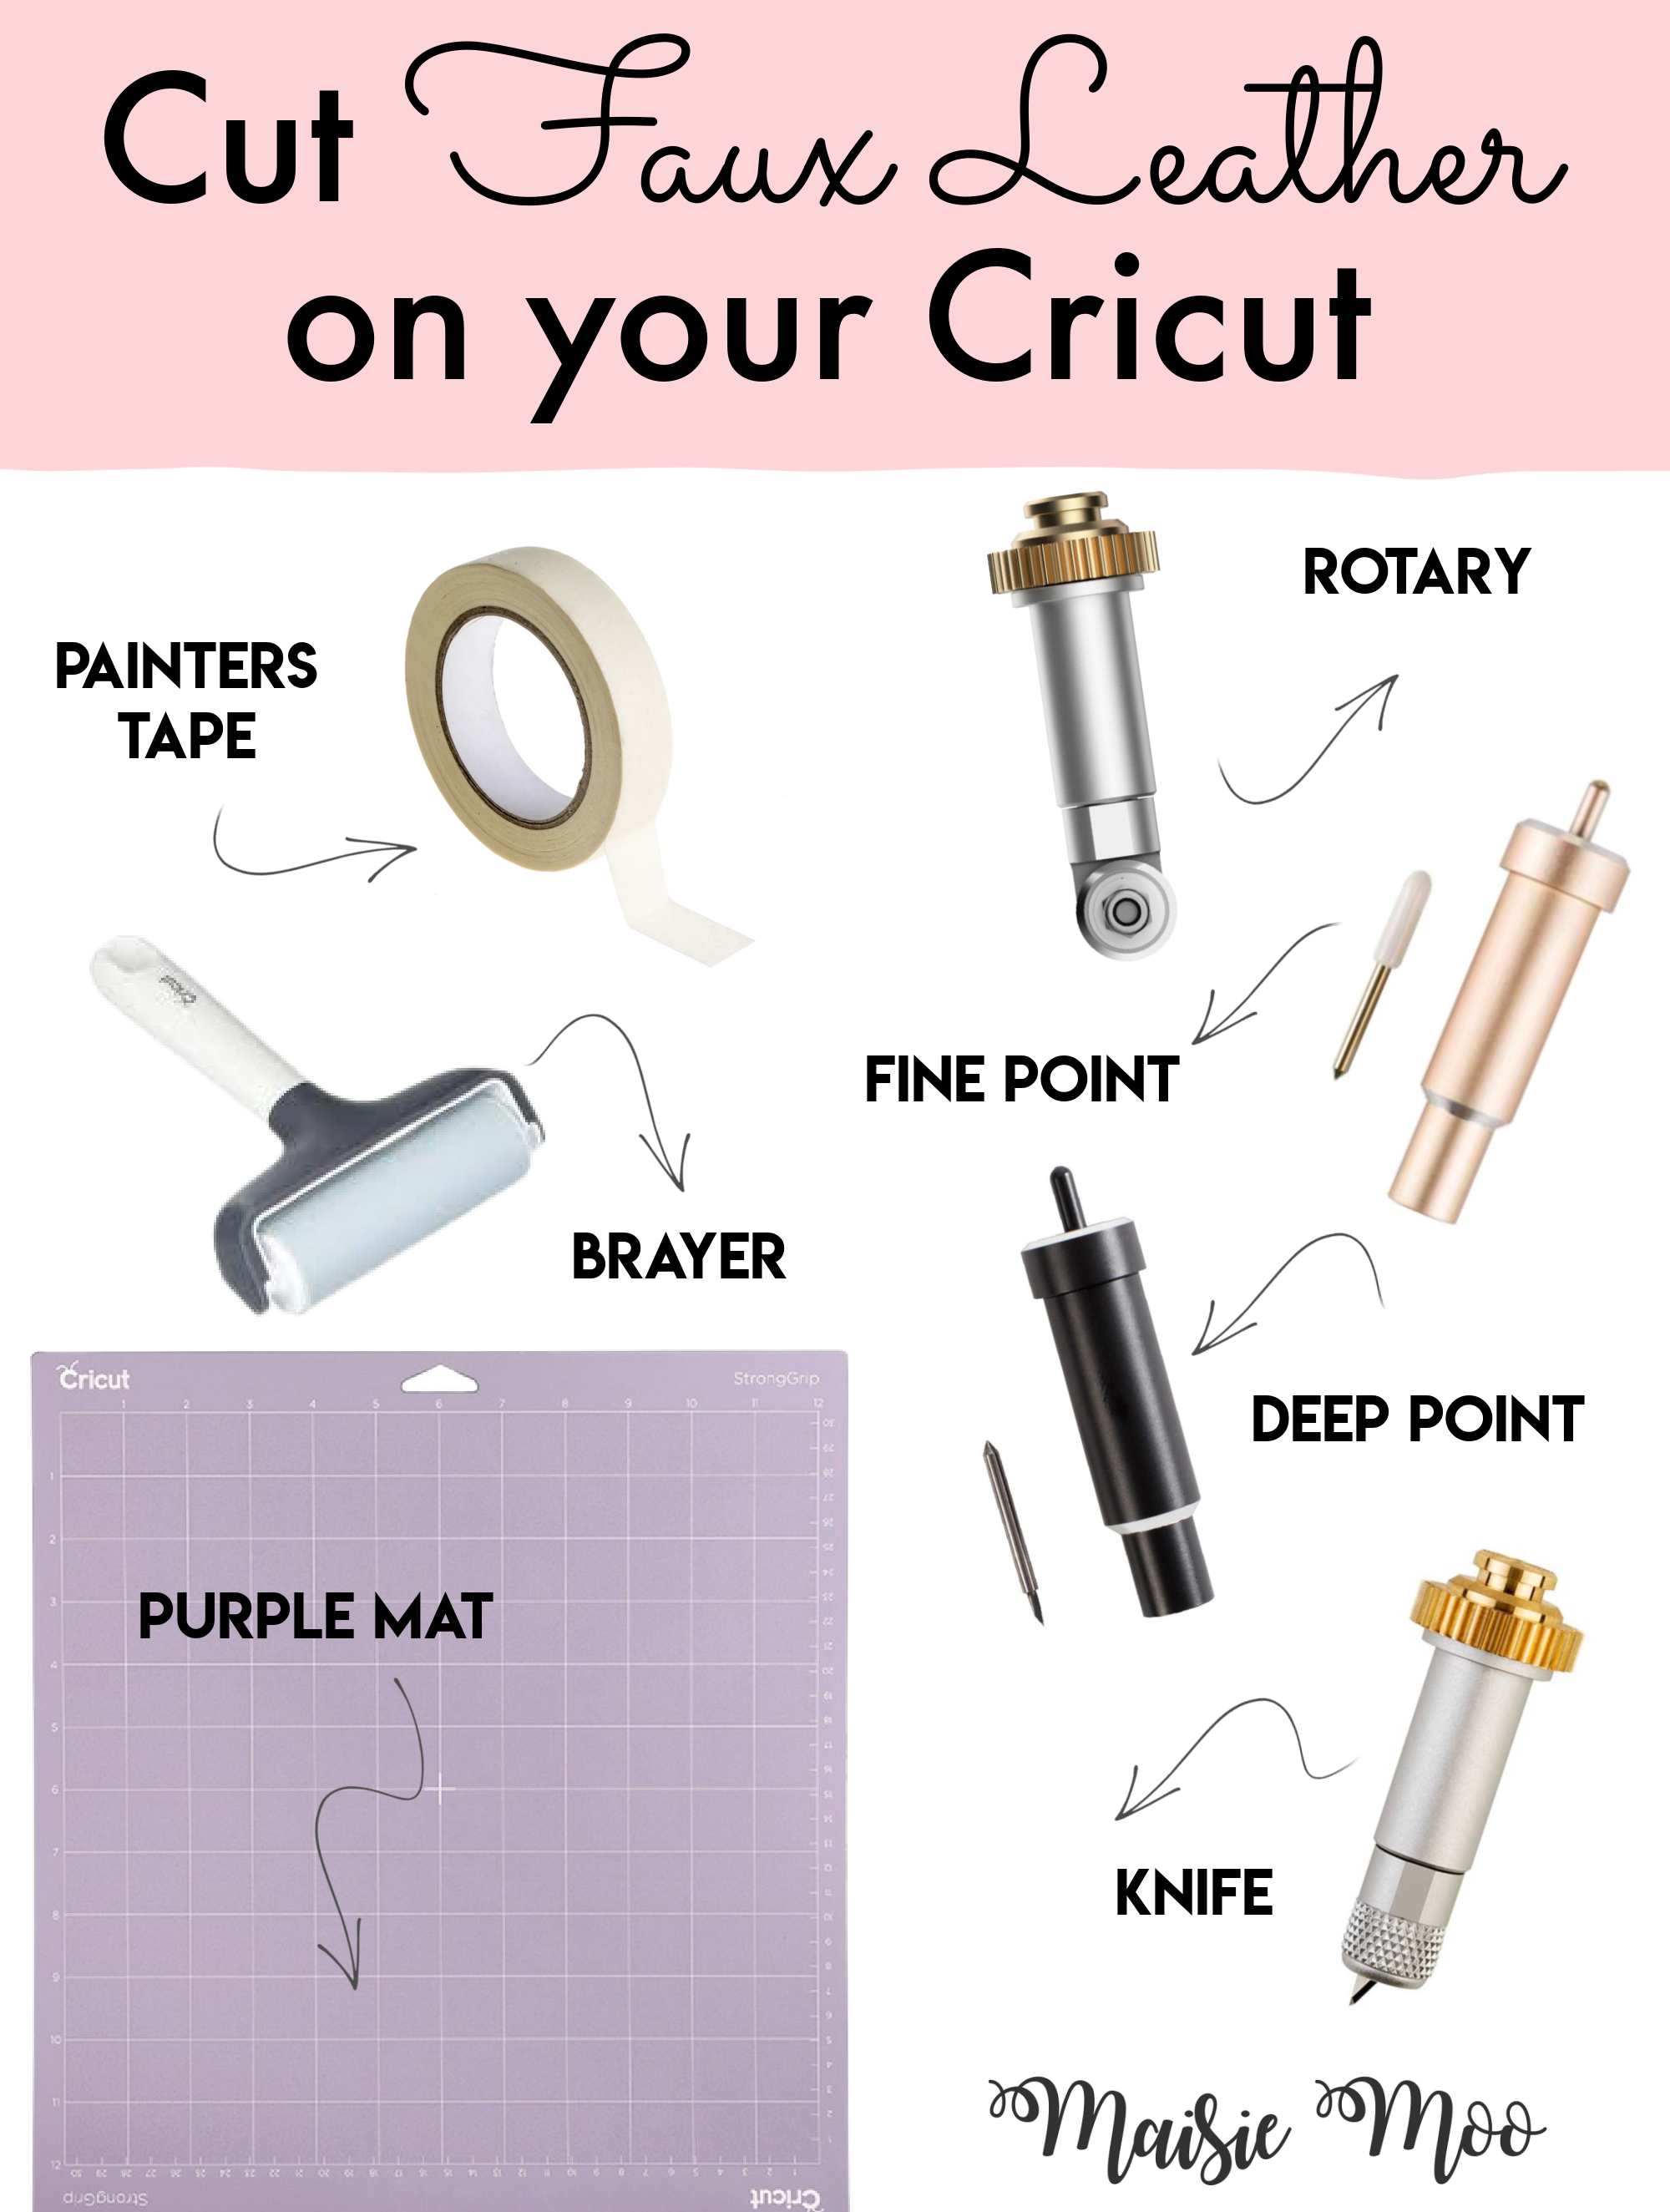 CRICUT FAUX LEATHER - Everything YOU Need To know! 